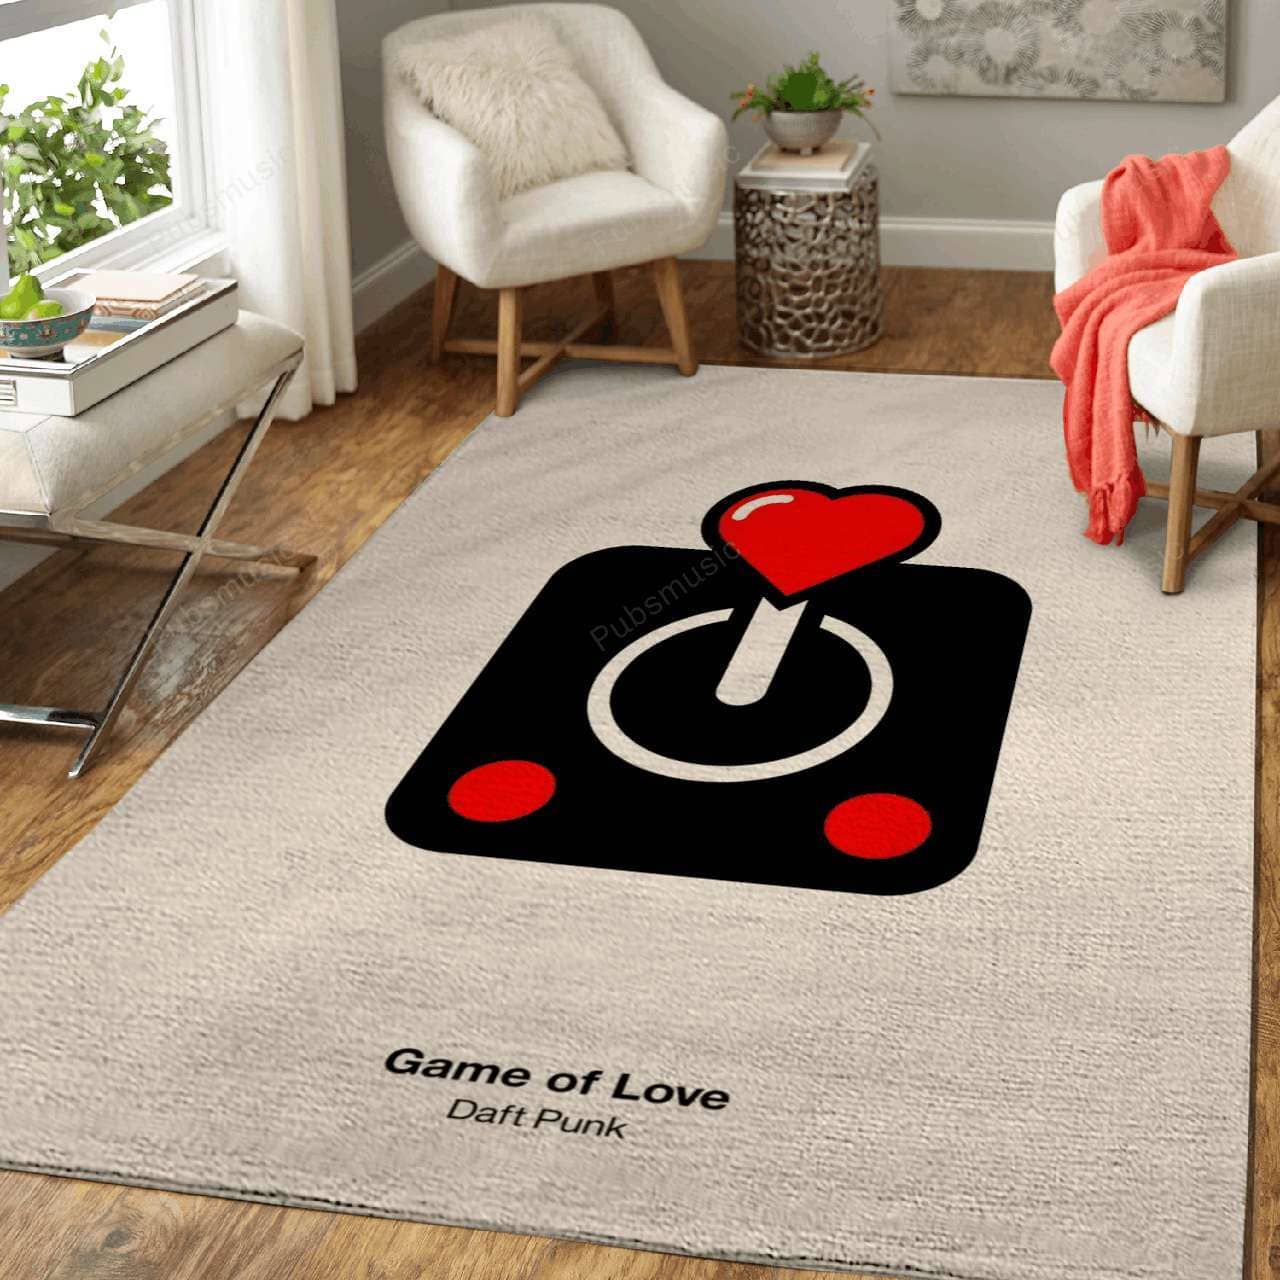 Amazon Game Of Love - Music Art For Fans Living Room Area No6085 Rug